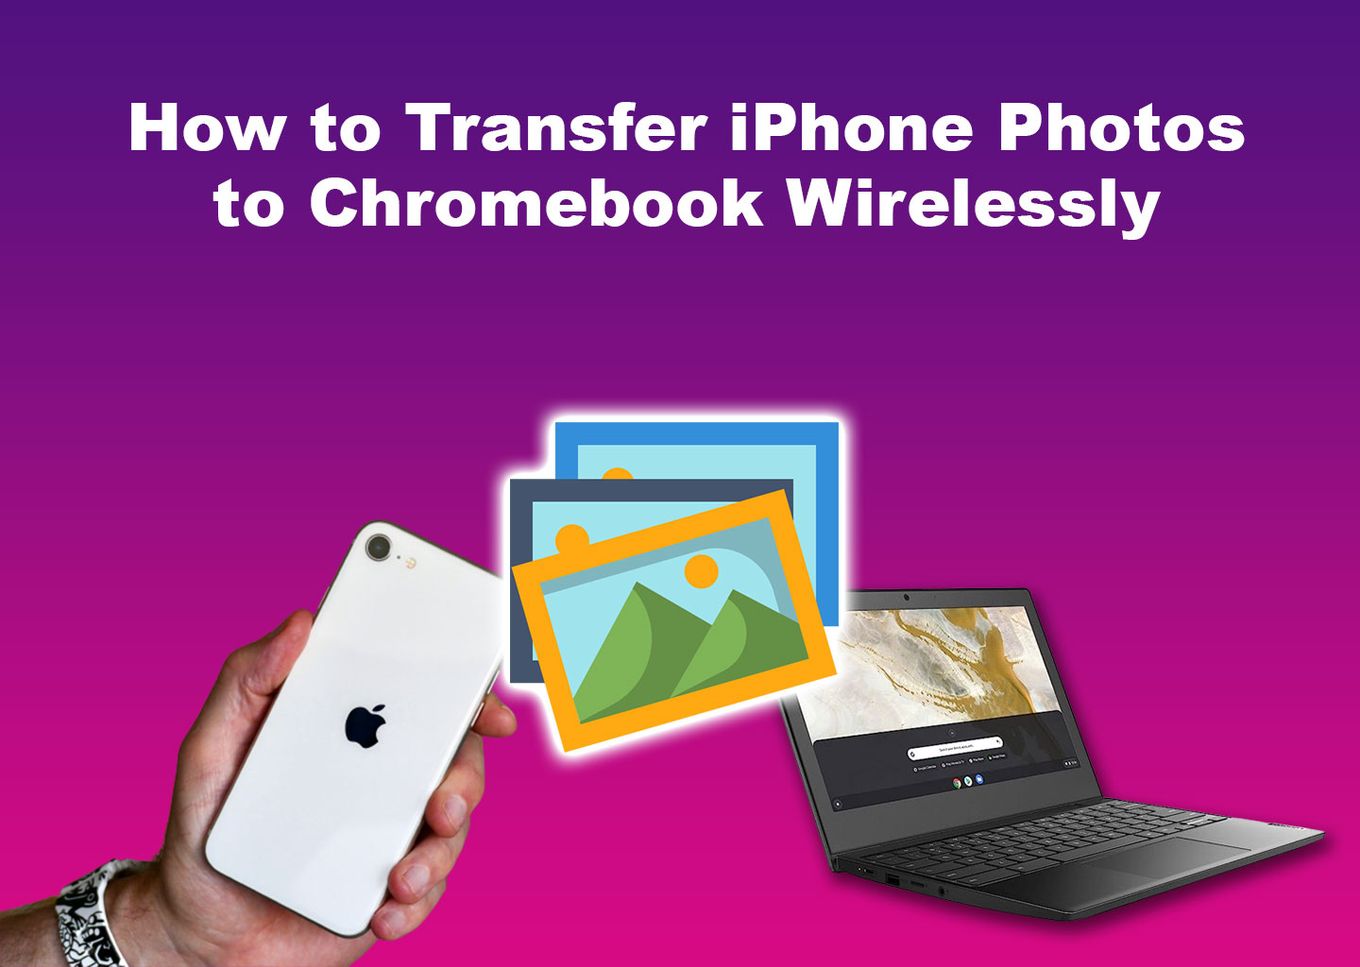 How to Transfer iPhone Photos to Chromebook Wirelessly